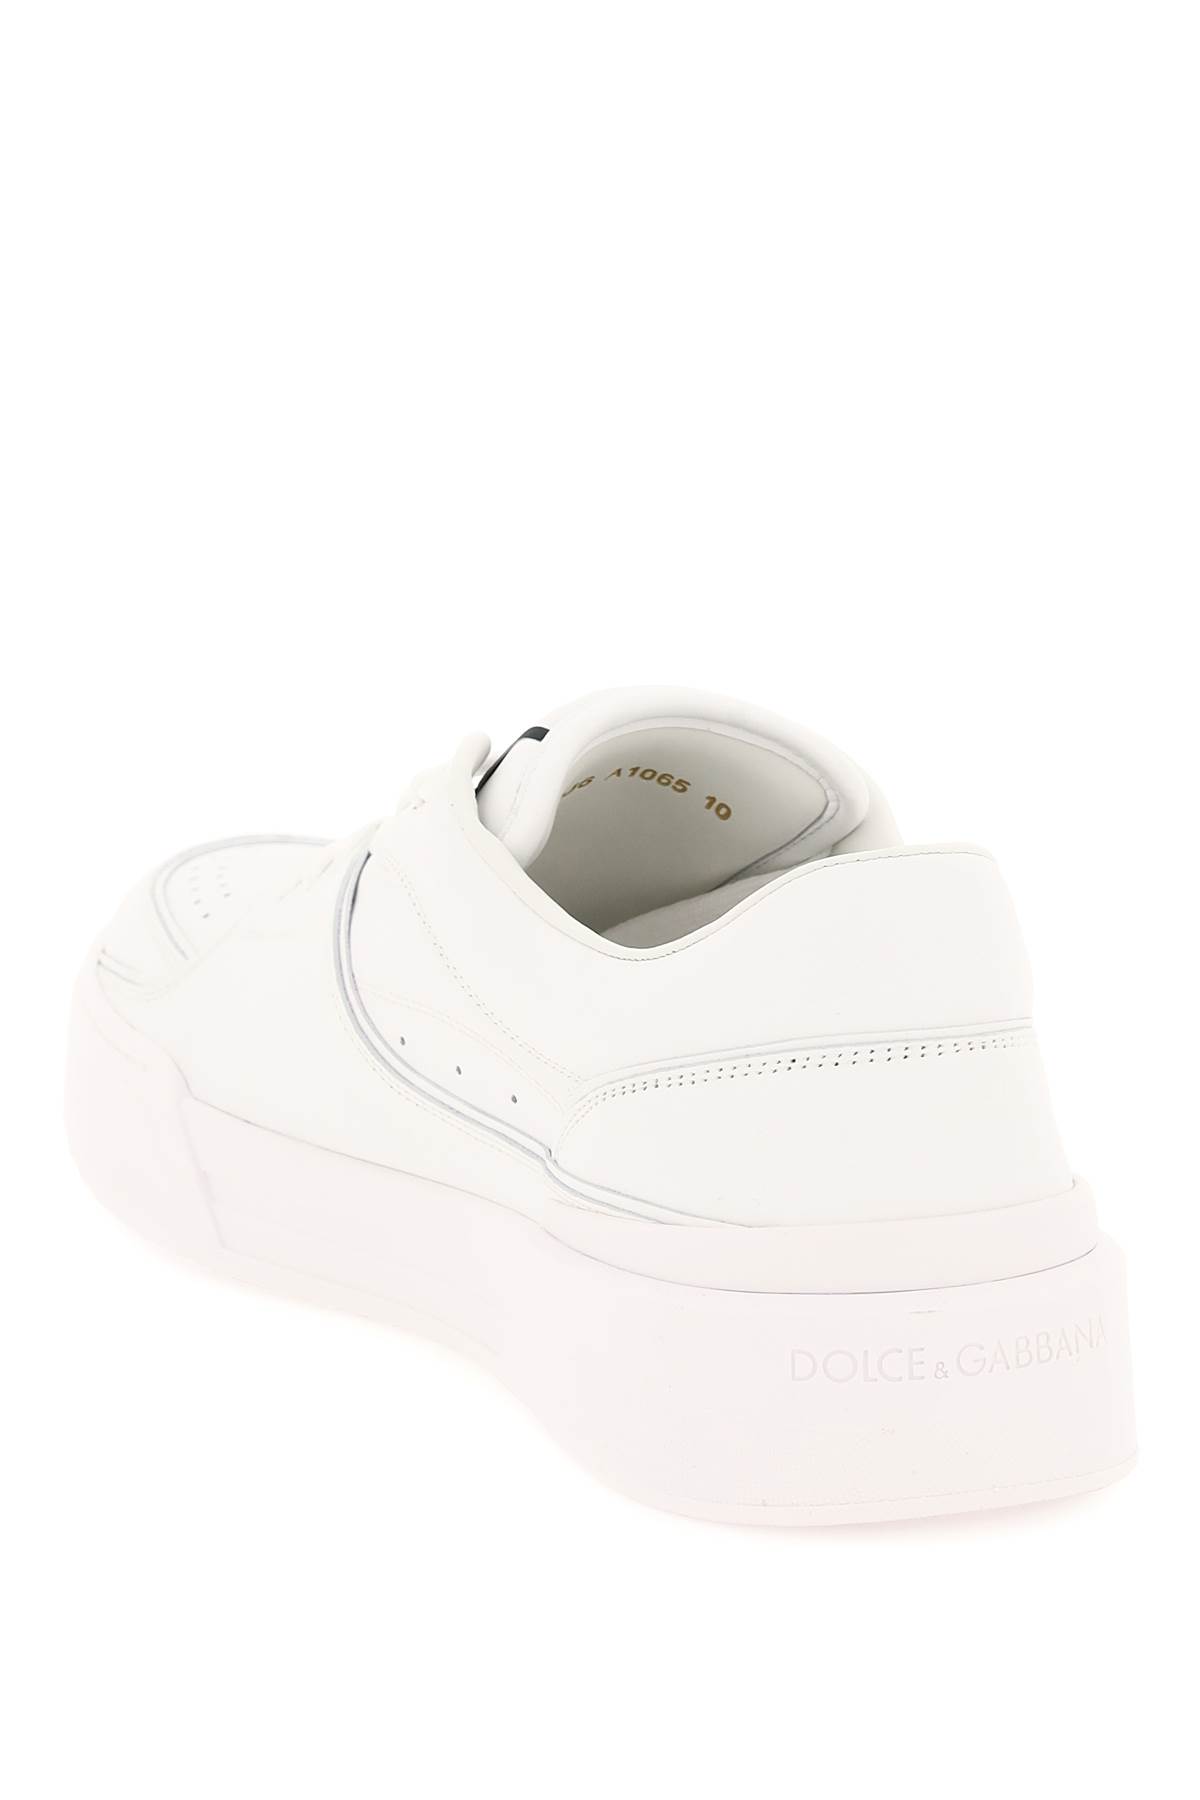 Dolce & Gabbana New Roma Leather Sneakers In Bianco